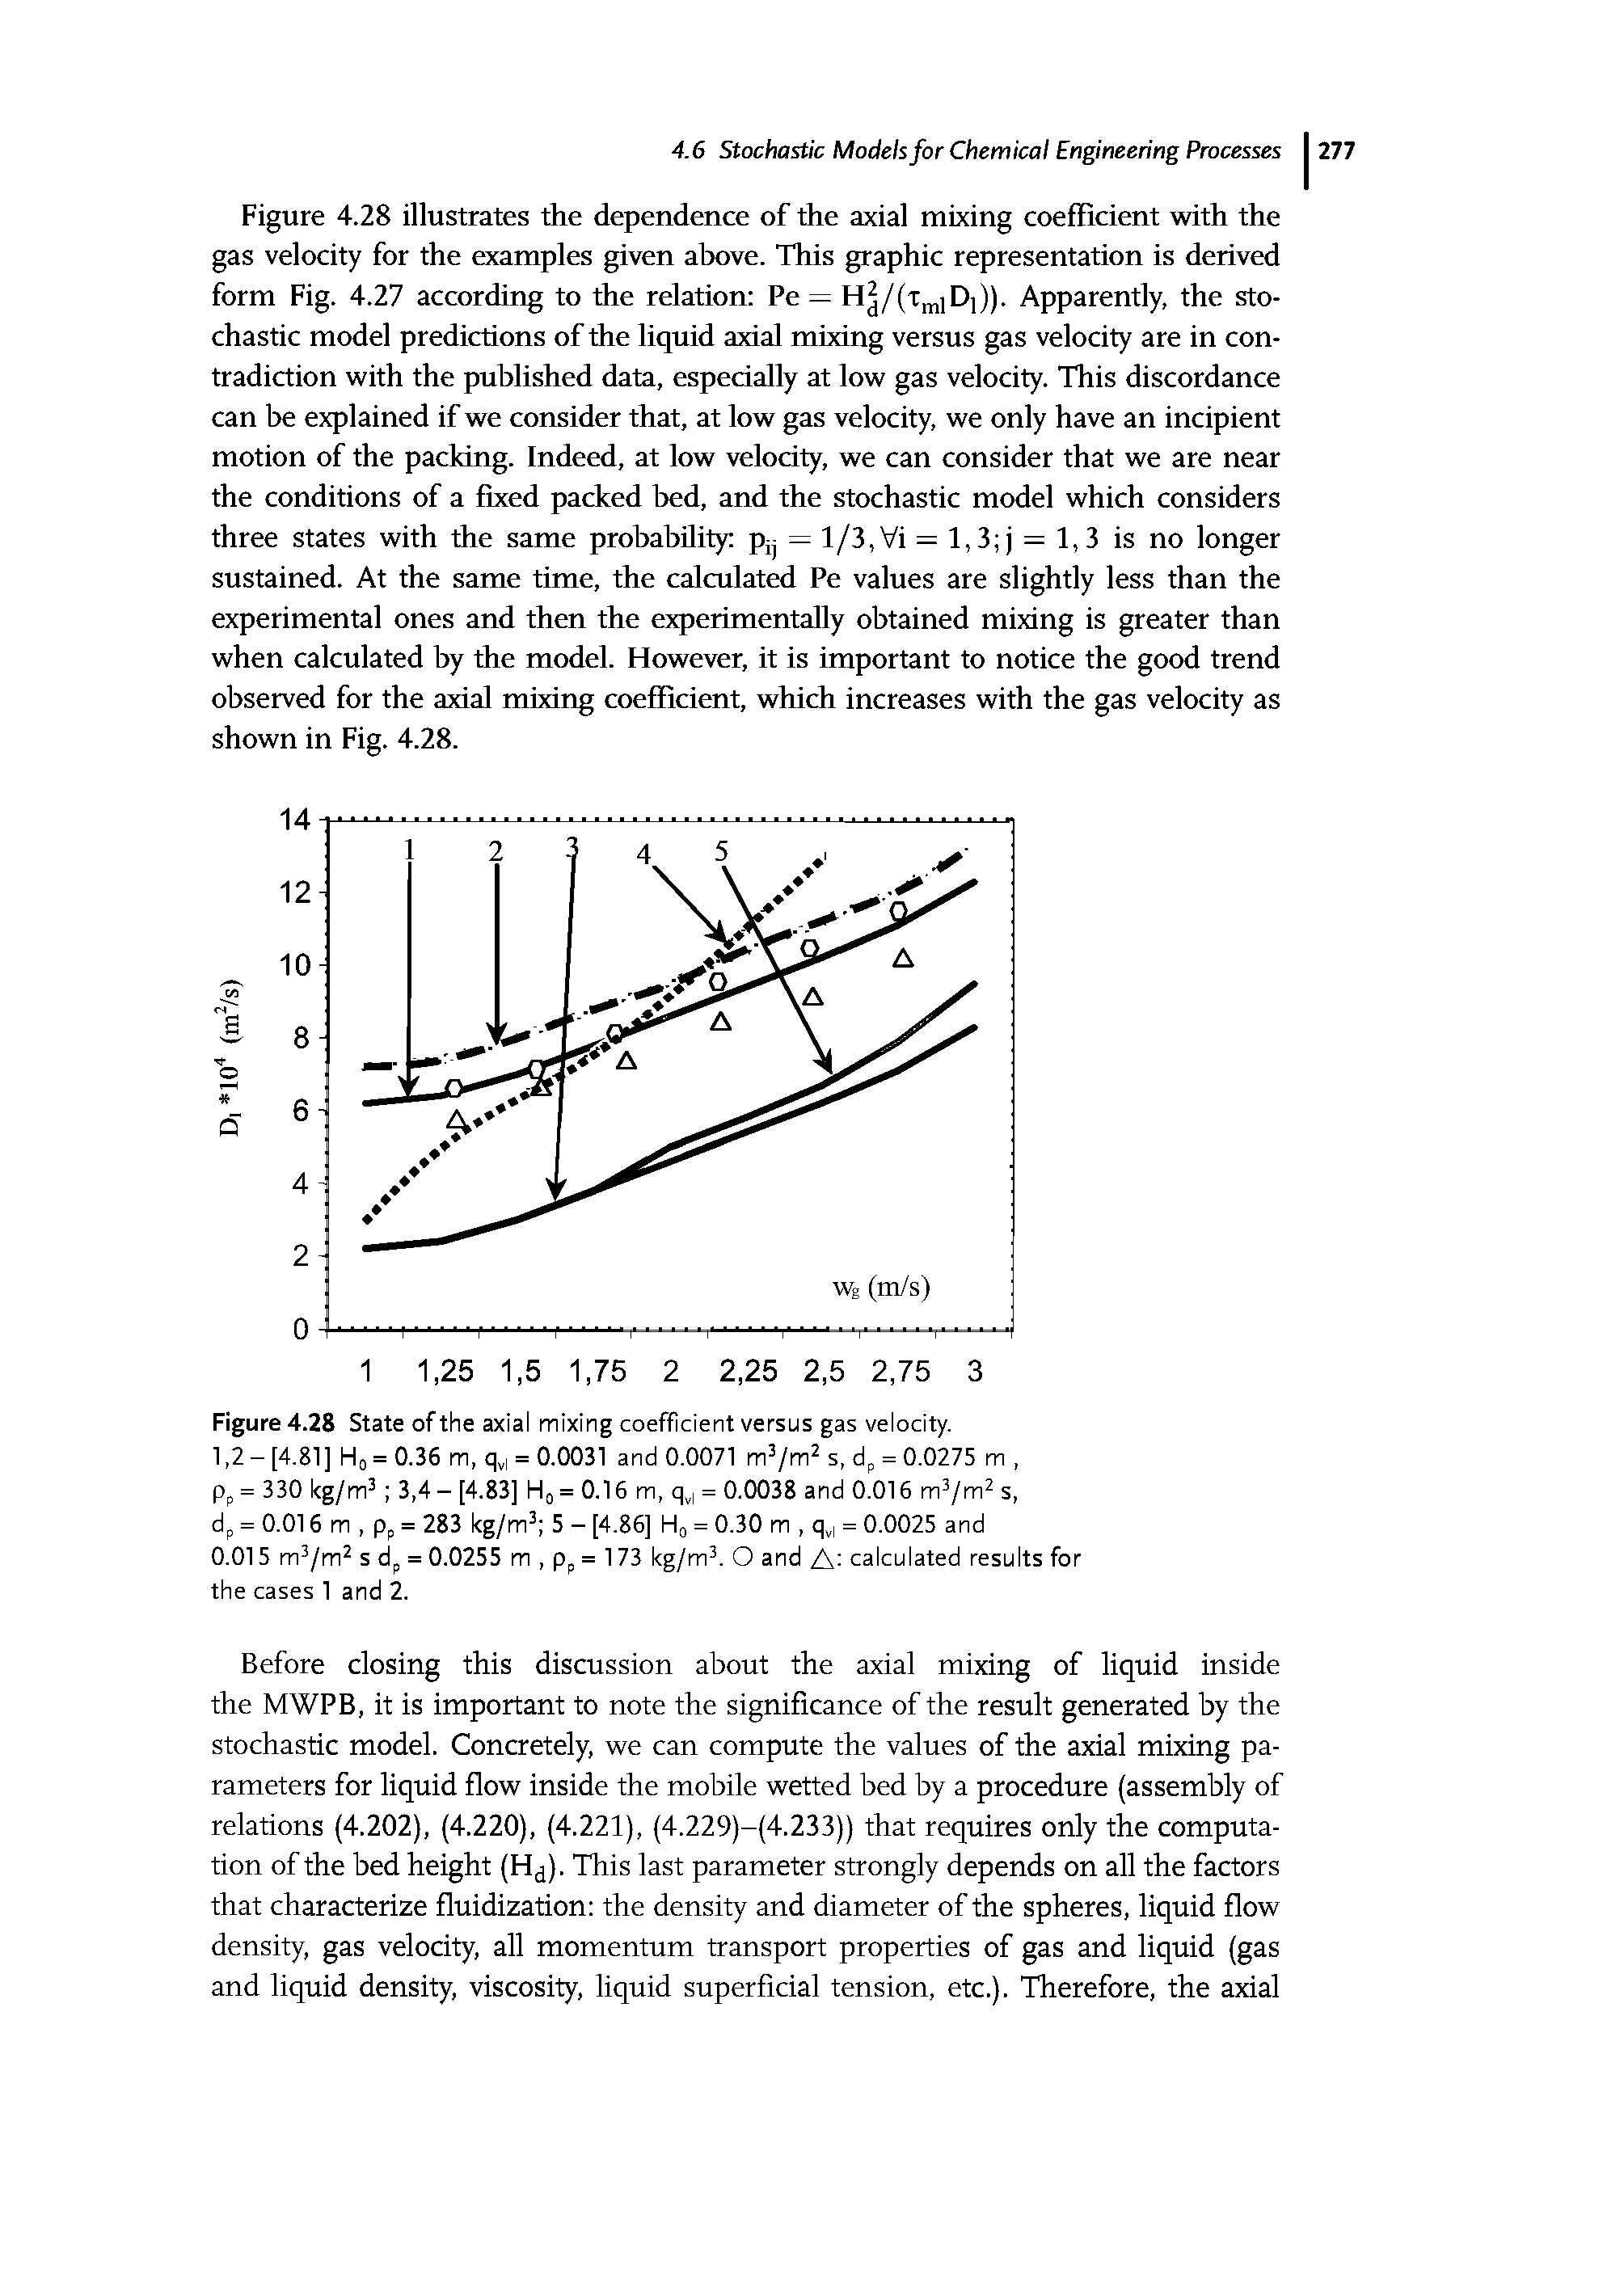 Figure 4.28 State of the axial mixing coefficient versus gas velocity.